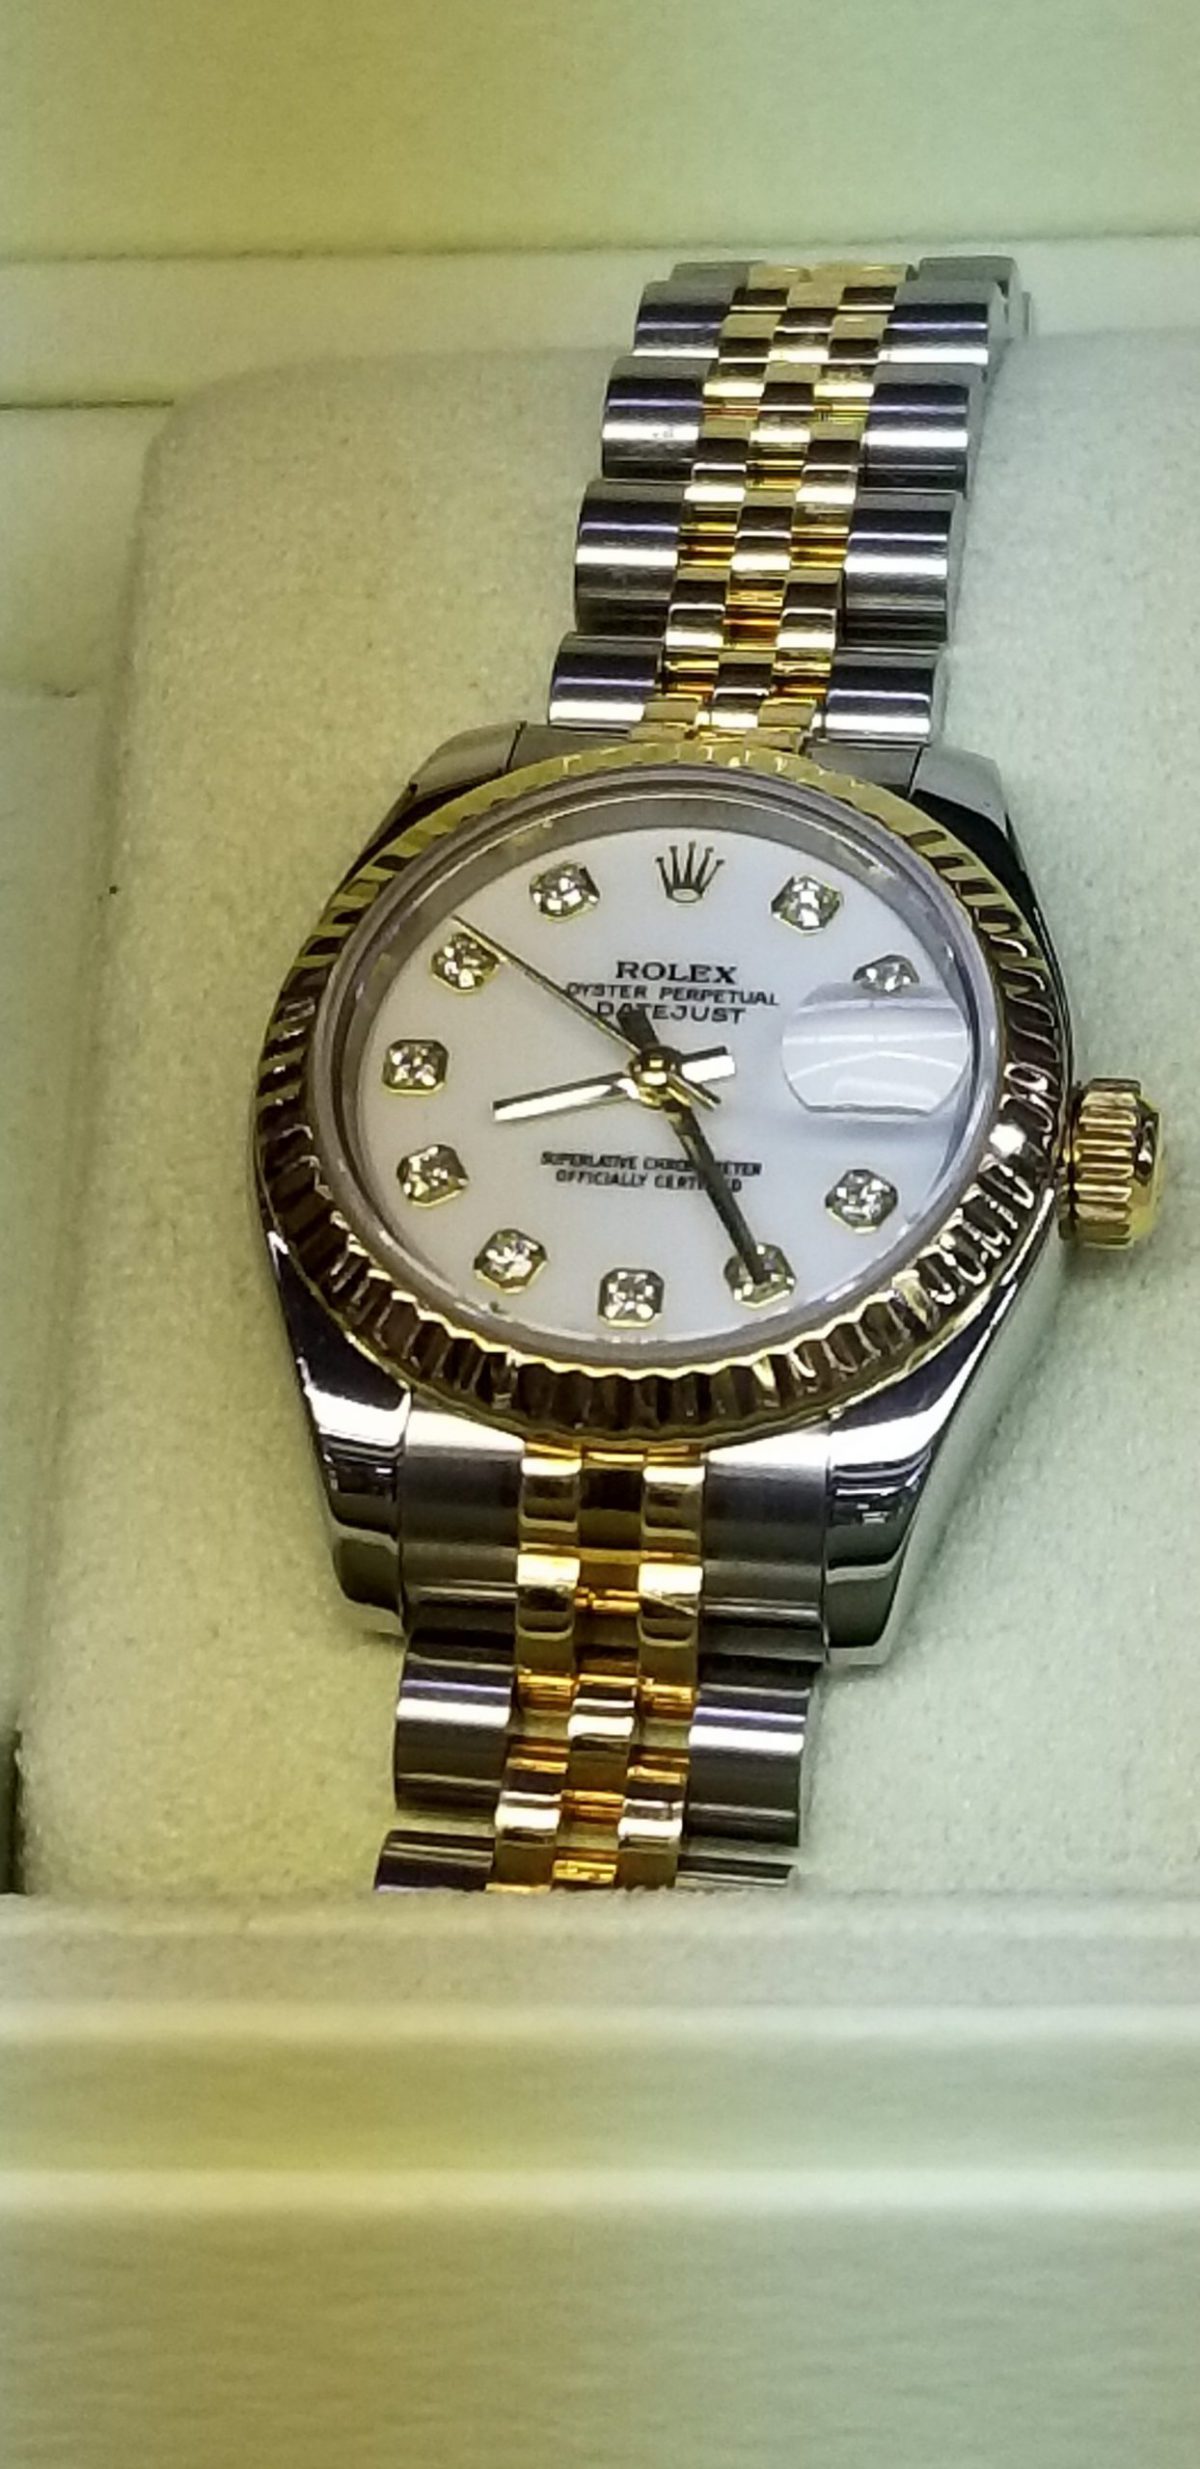 Ladies Rolex Watch 179173 Factory Diamond Dial with 18k &#038; Stainless Steel Hidden Clasp $5,985